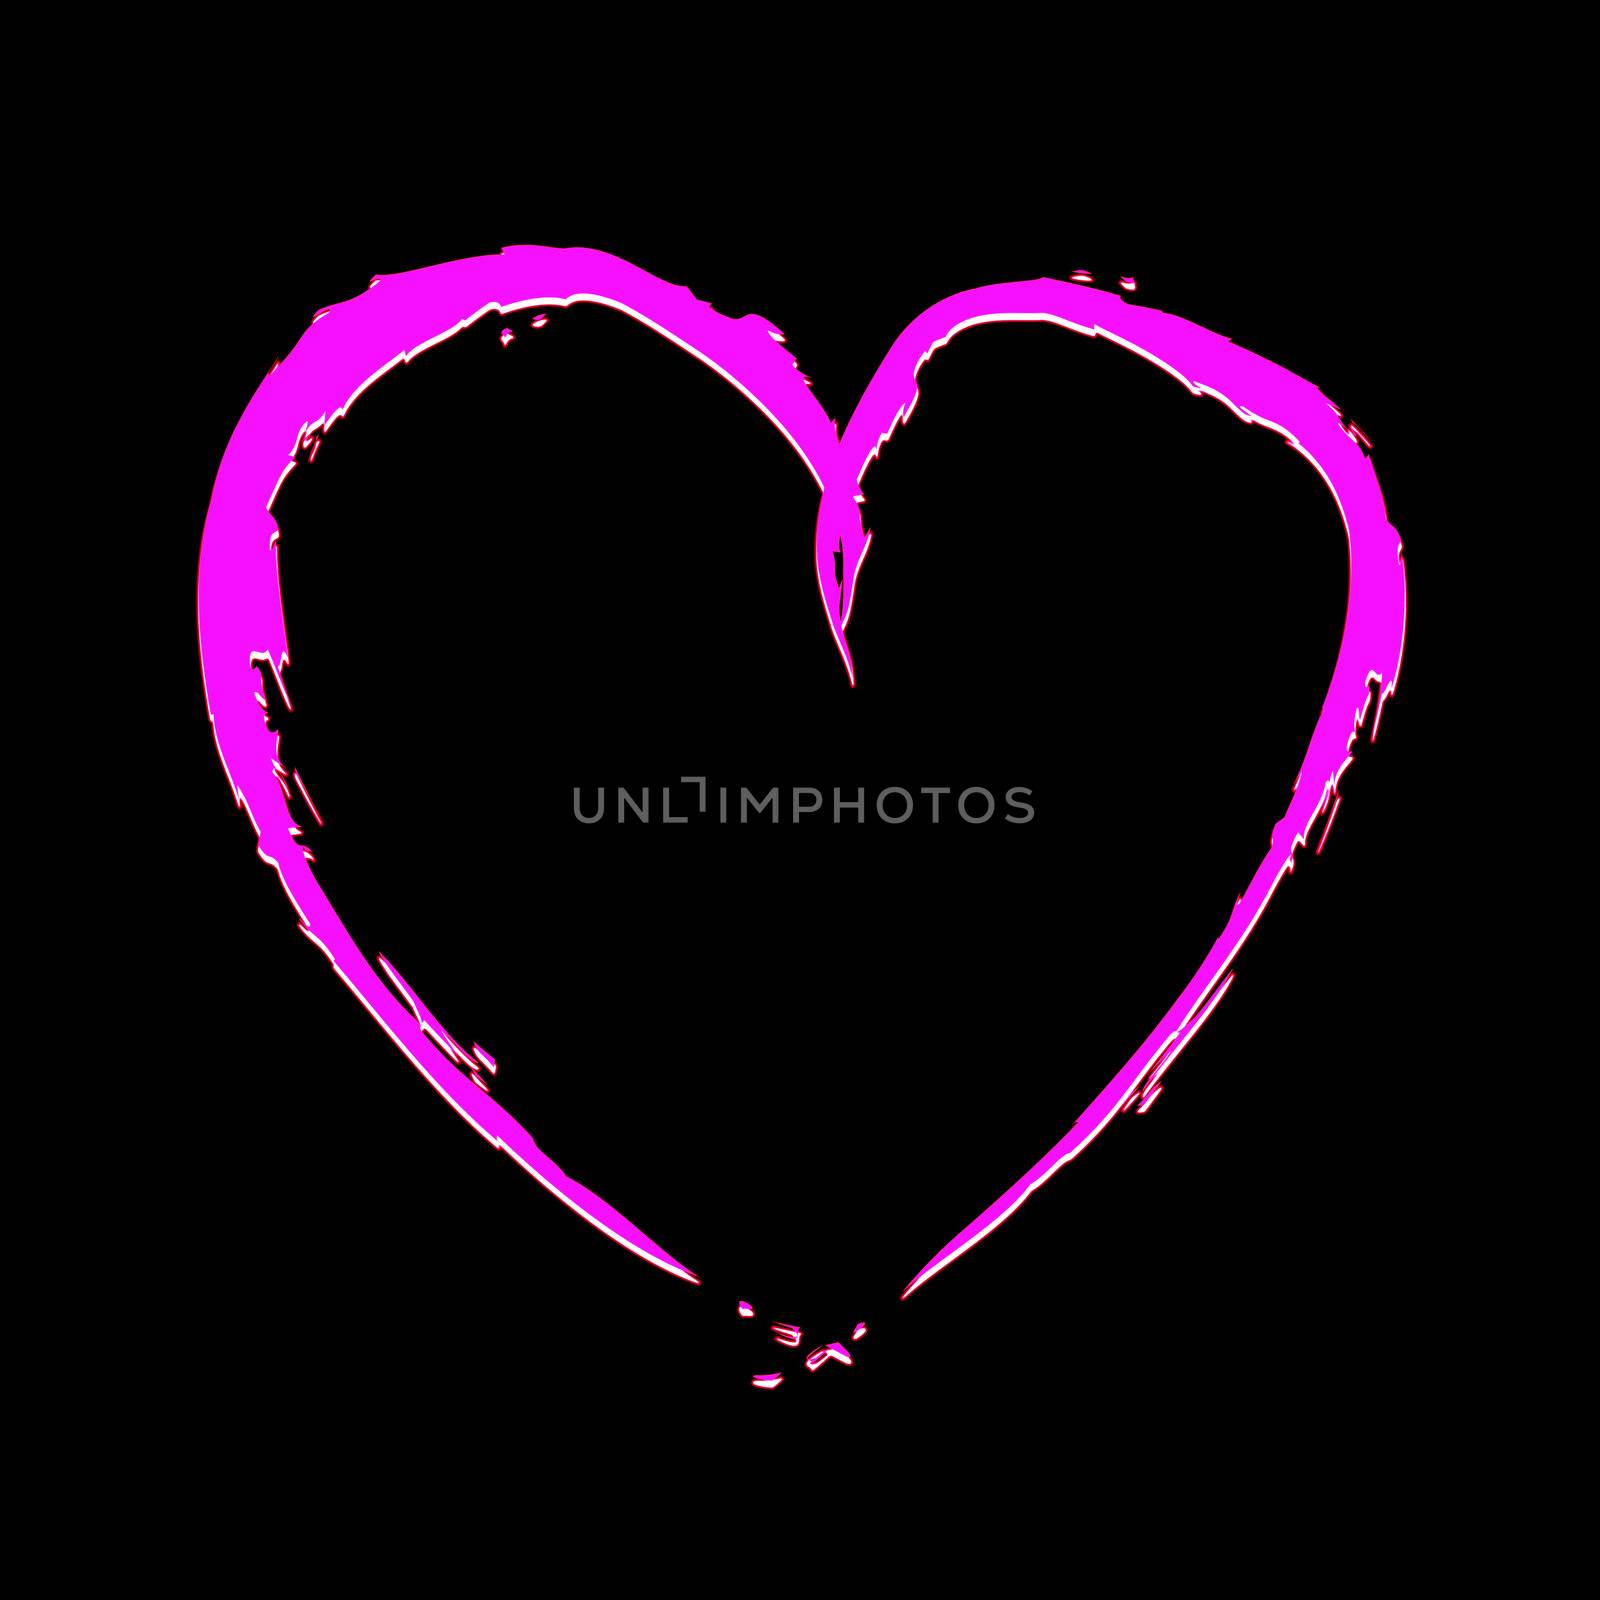 Pink heart with fragmentary edges on black background